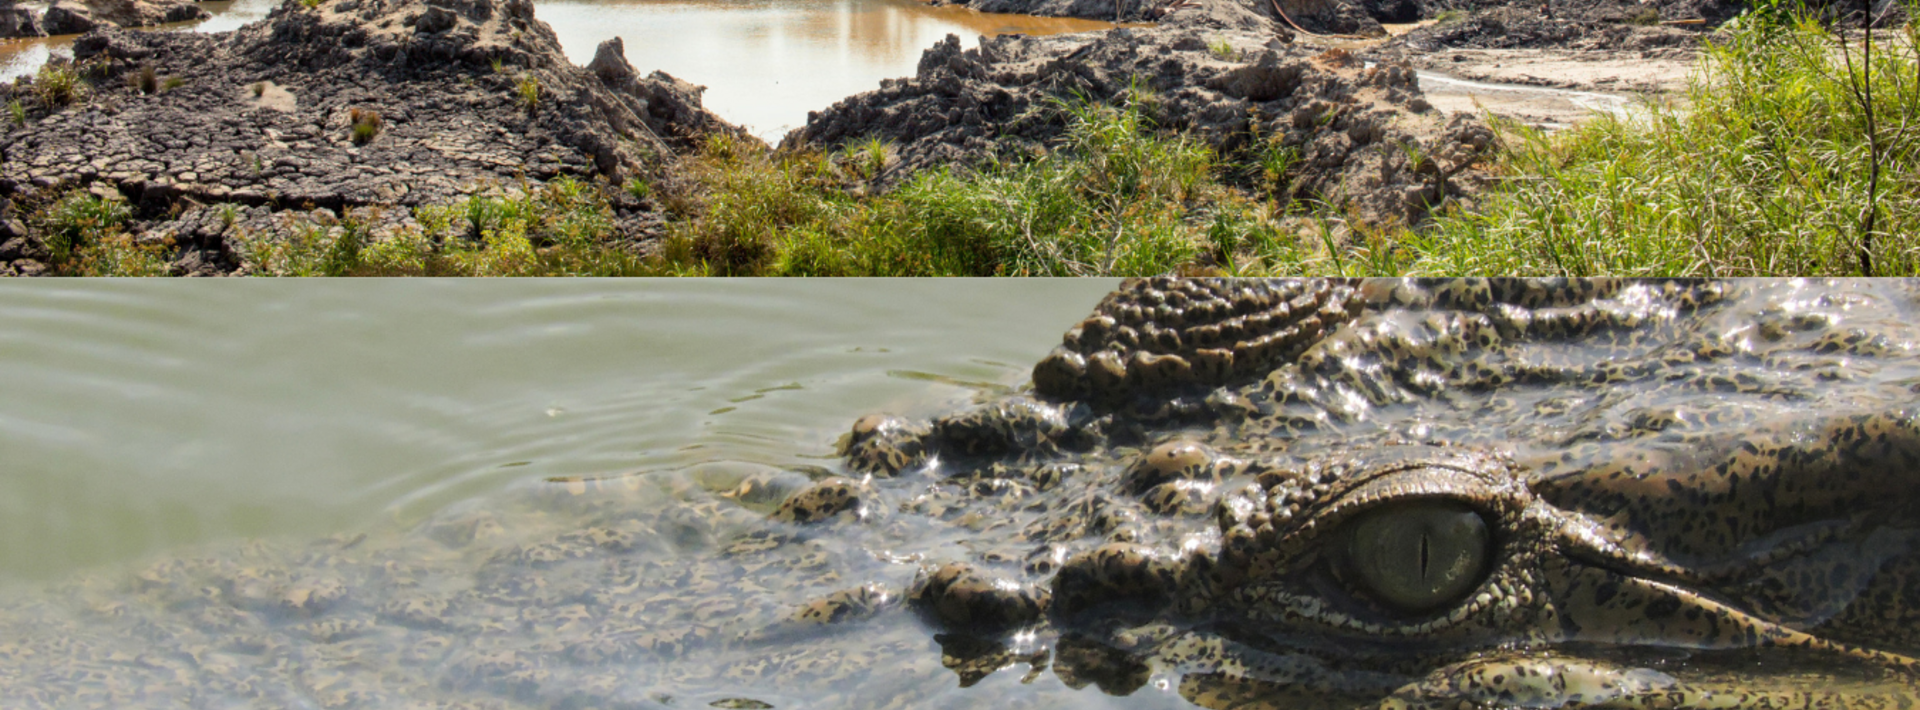 Tin Mining and River Attacks: Inside Indonesia's Human-Crocodile Conflict